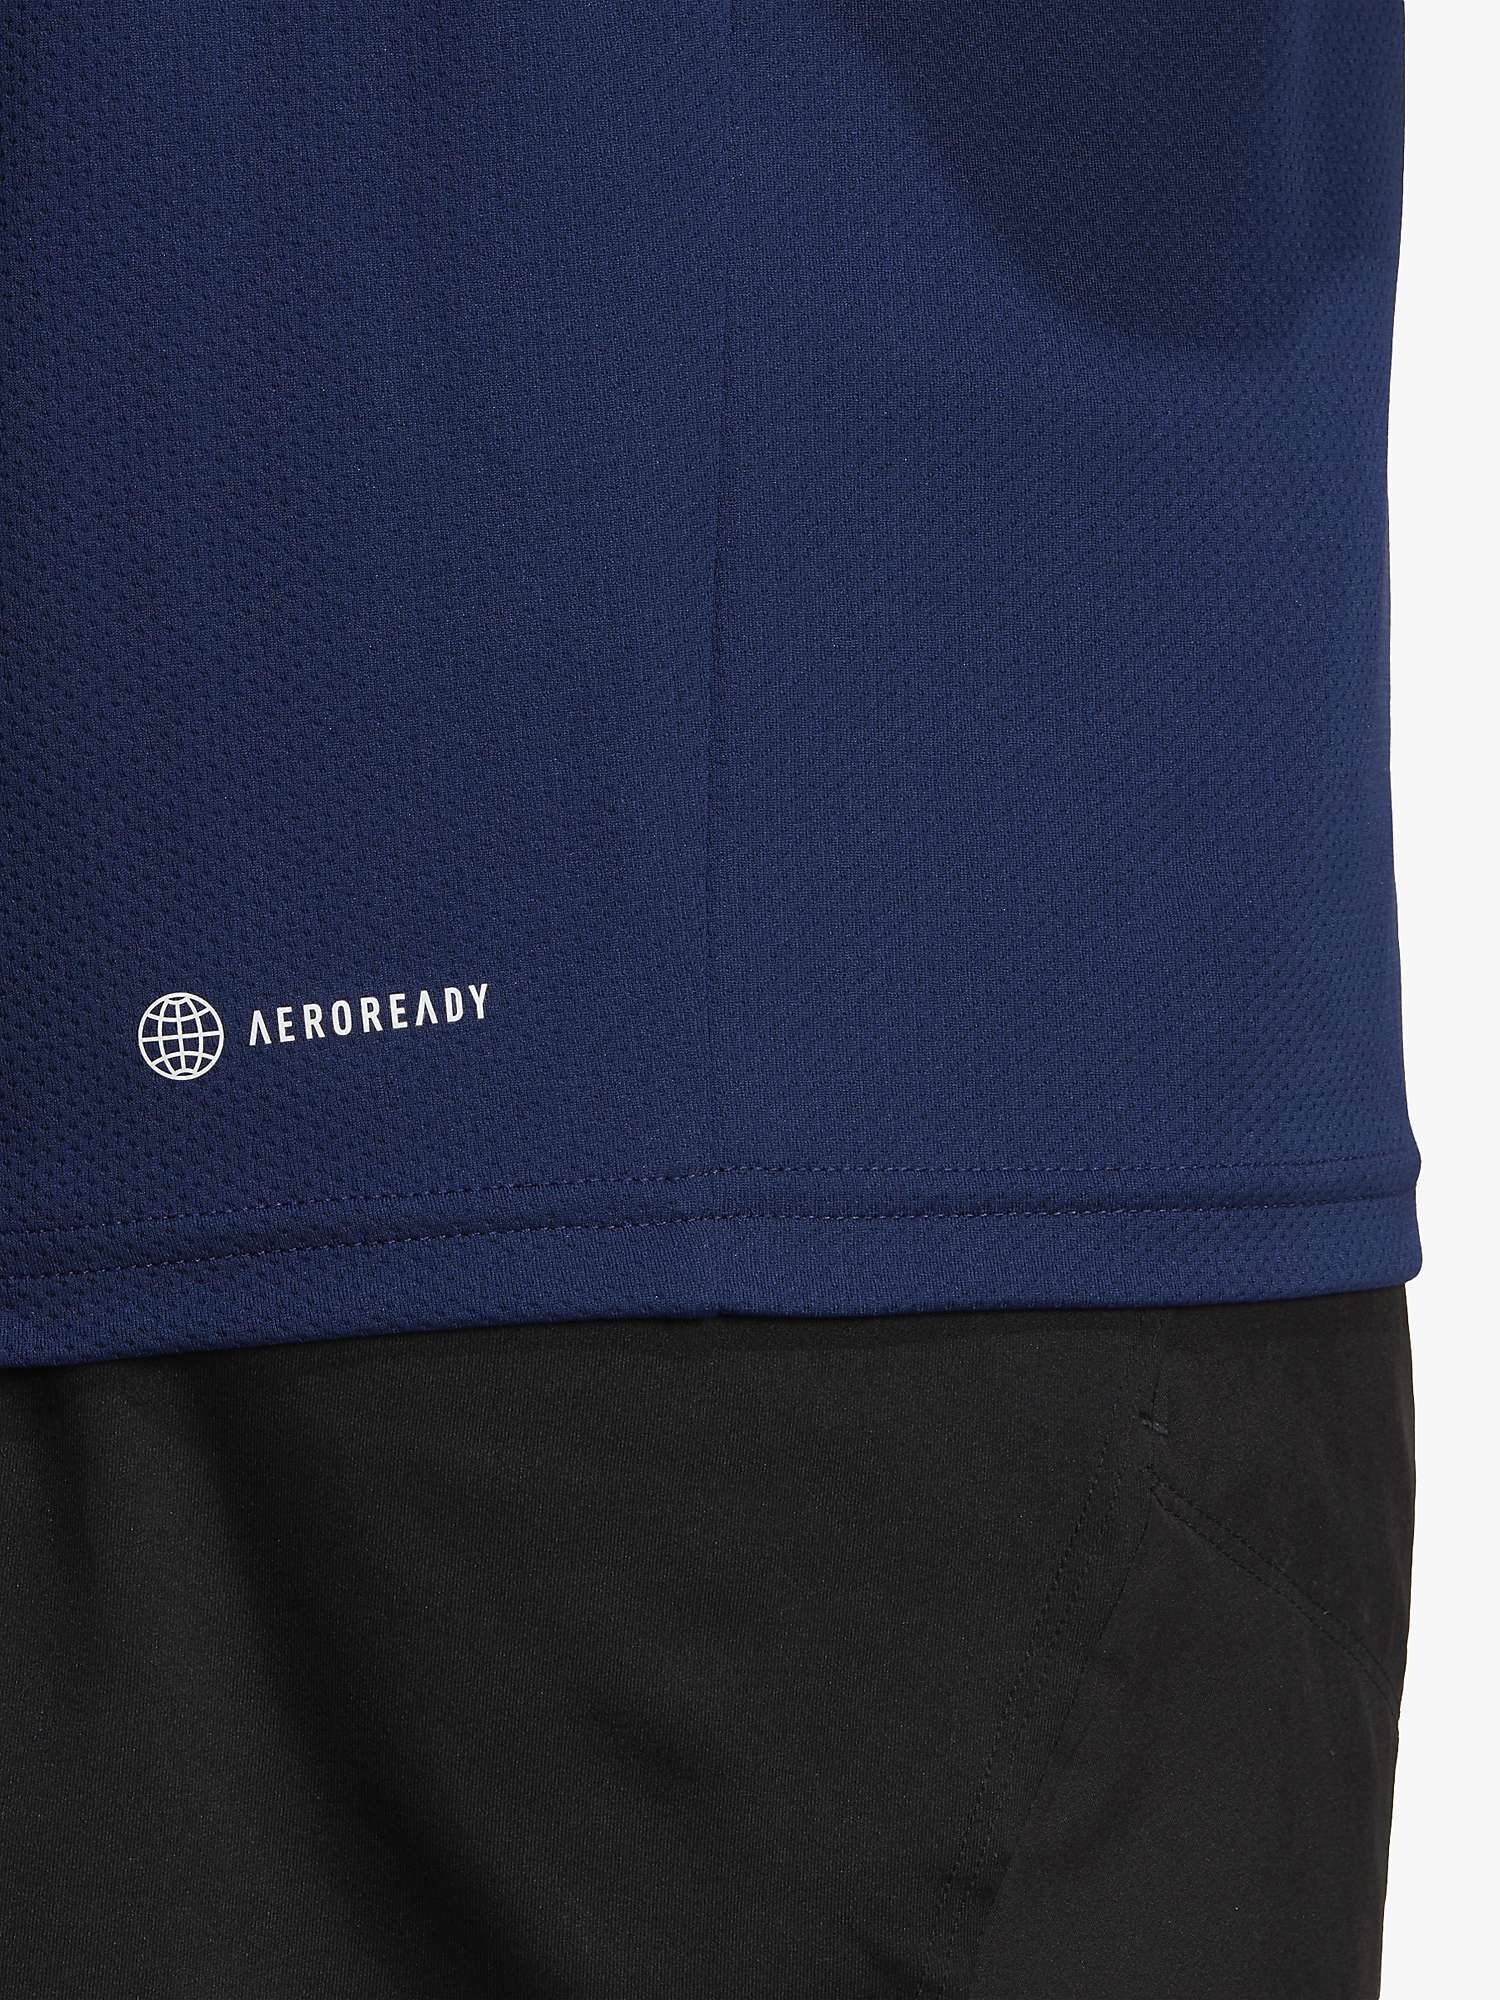 Buy adidas Train Essentials Recycled Gym Top Online at johnlewis.com